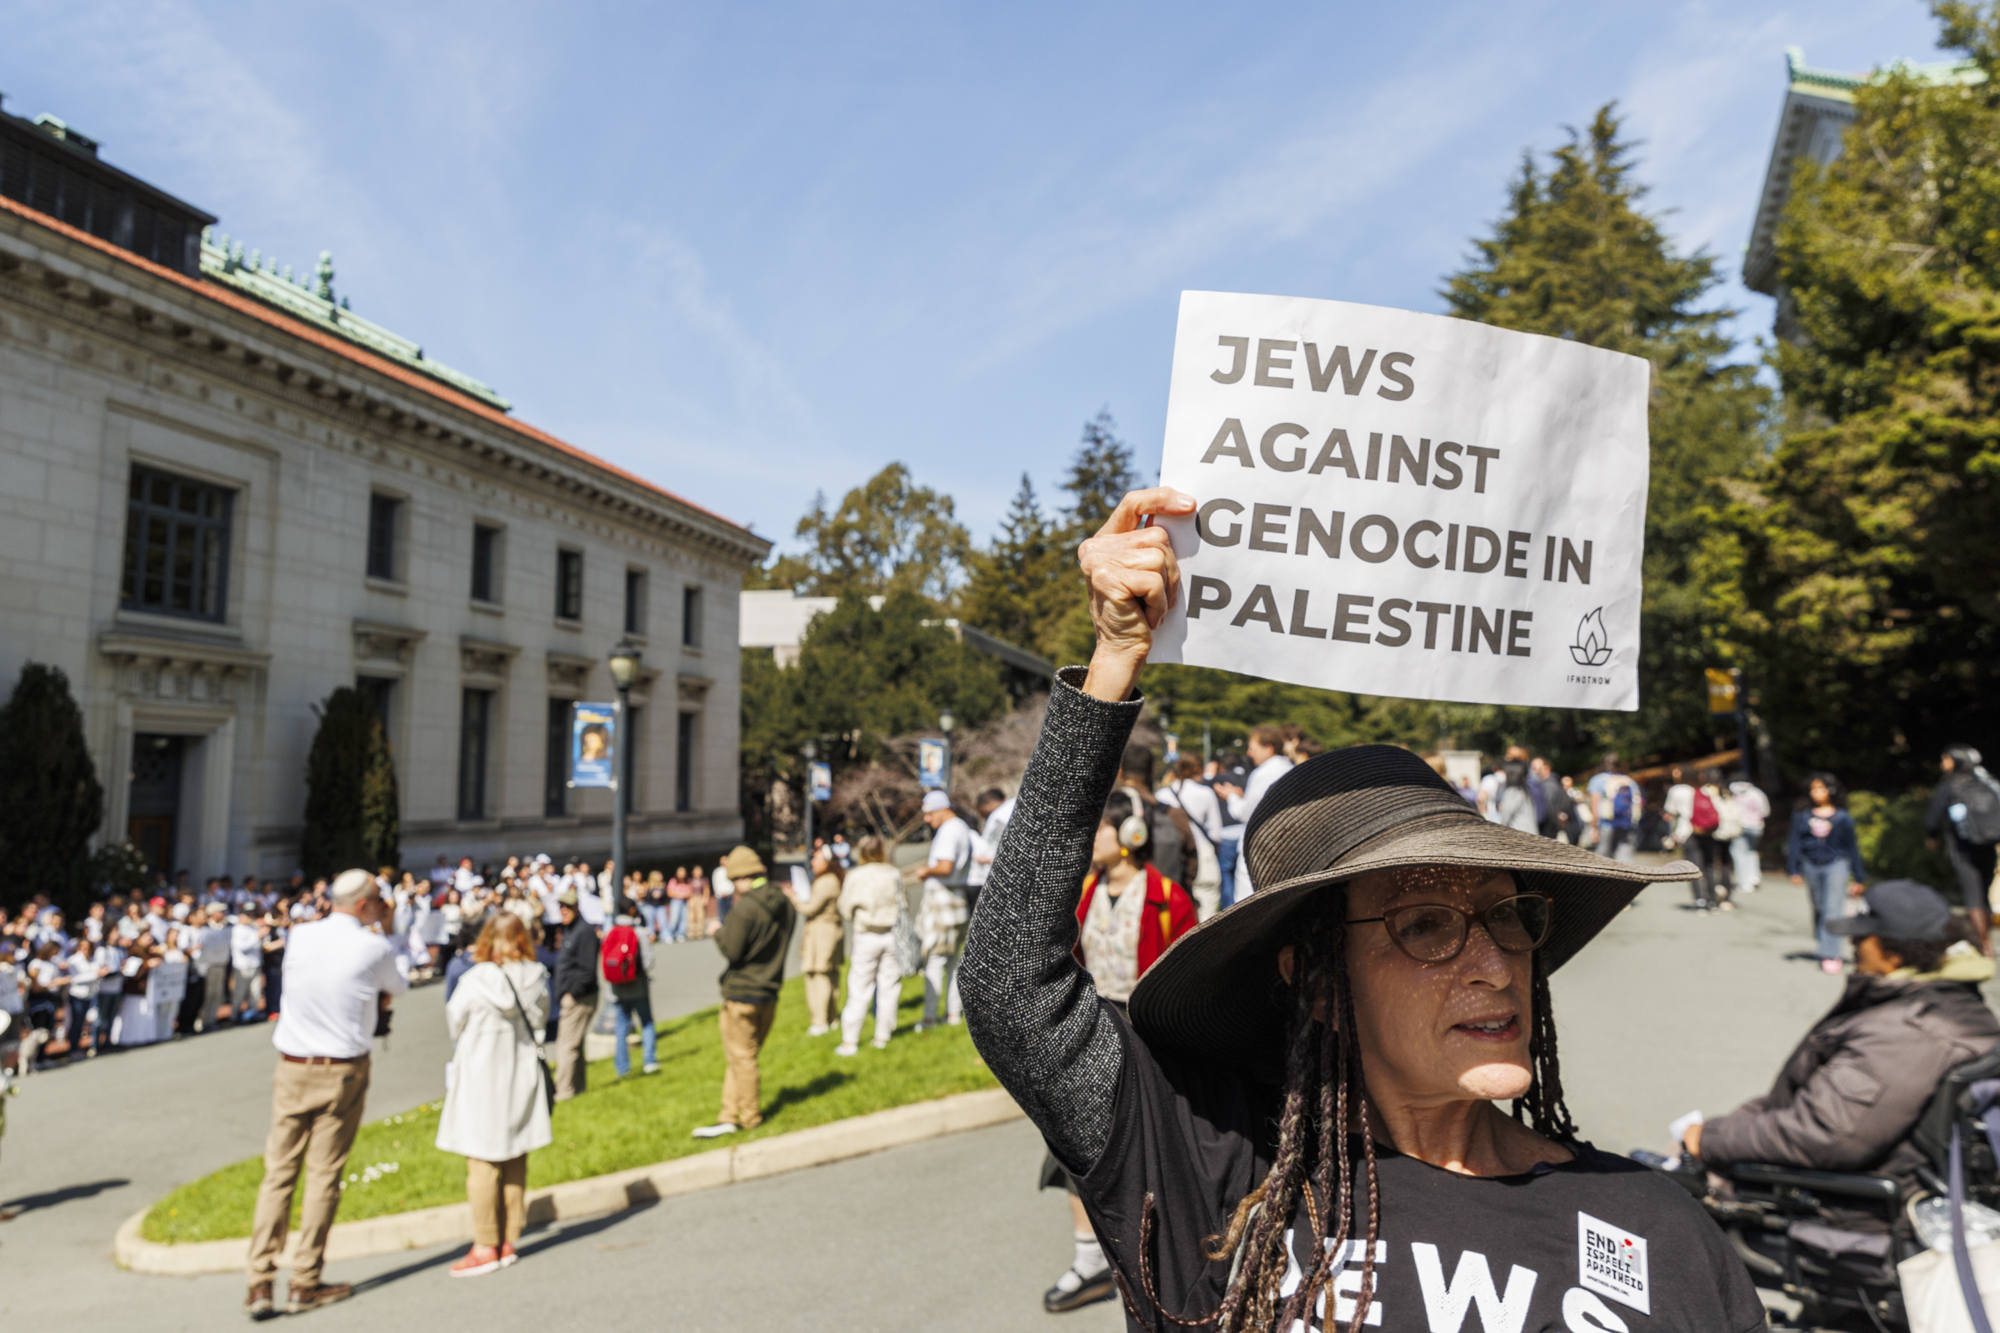 A person stands in an outdoor setting in front of a large group of people holding a sign that reads "Jews Against Genocide in Palestine".